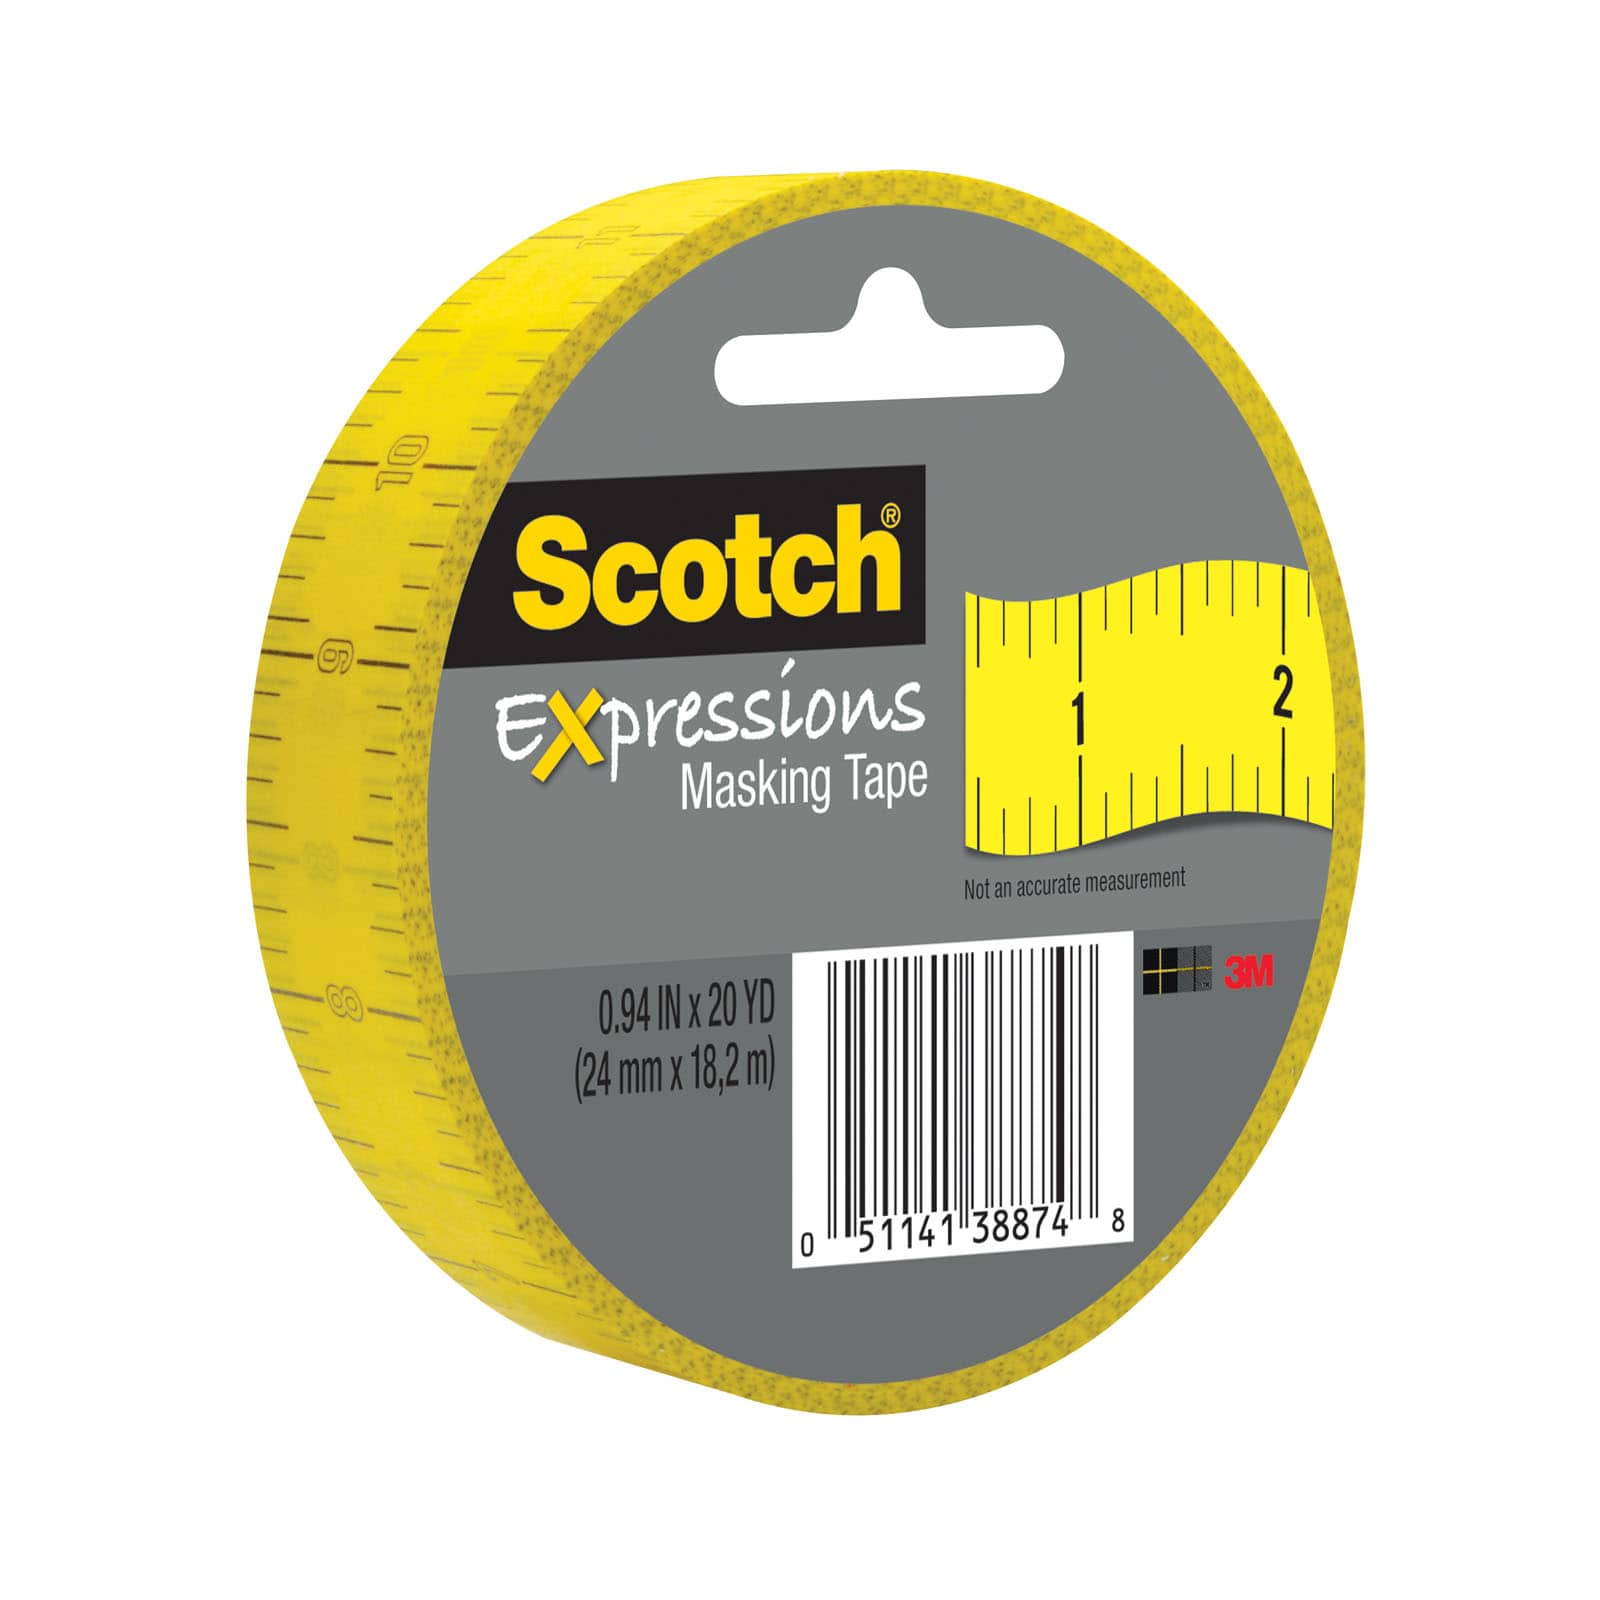 1 Adhesive Cloth Ruler Tape: 7 yds - Yellow